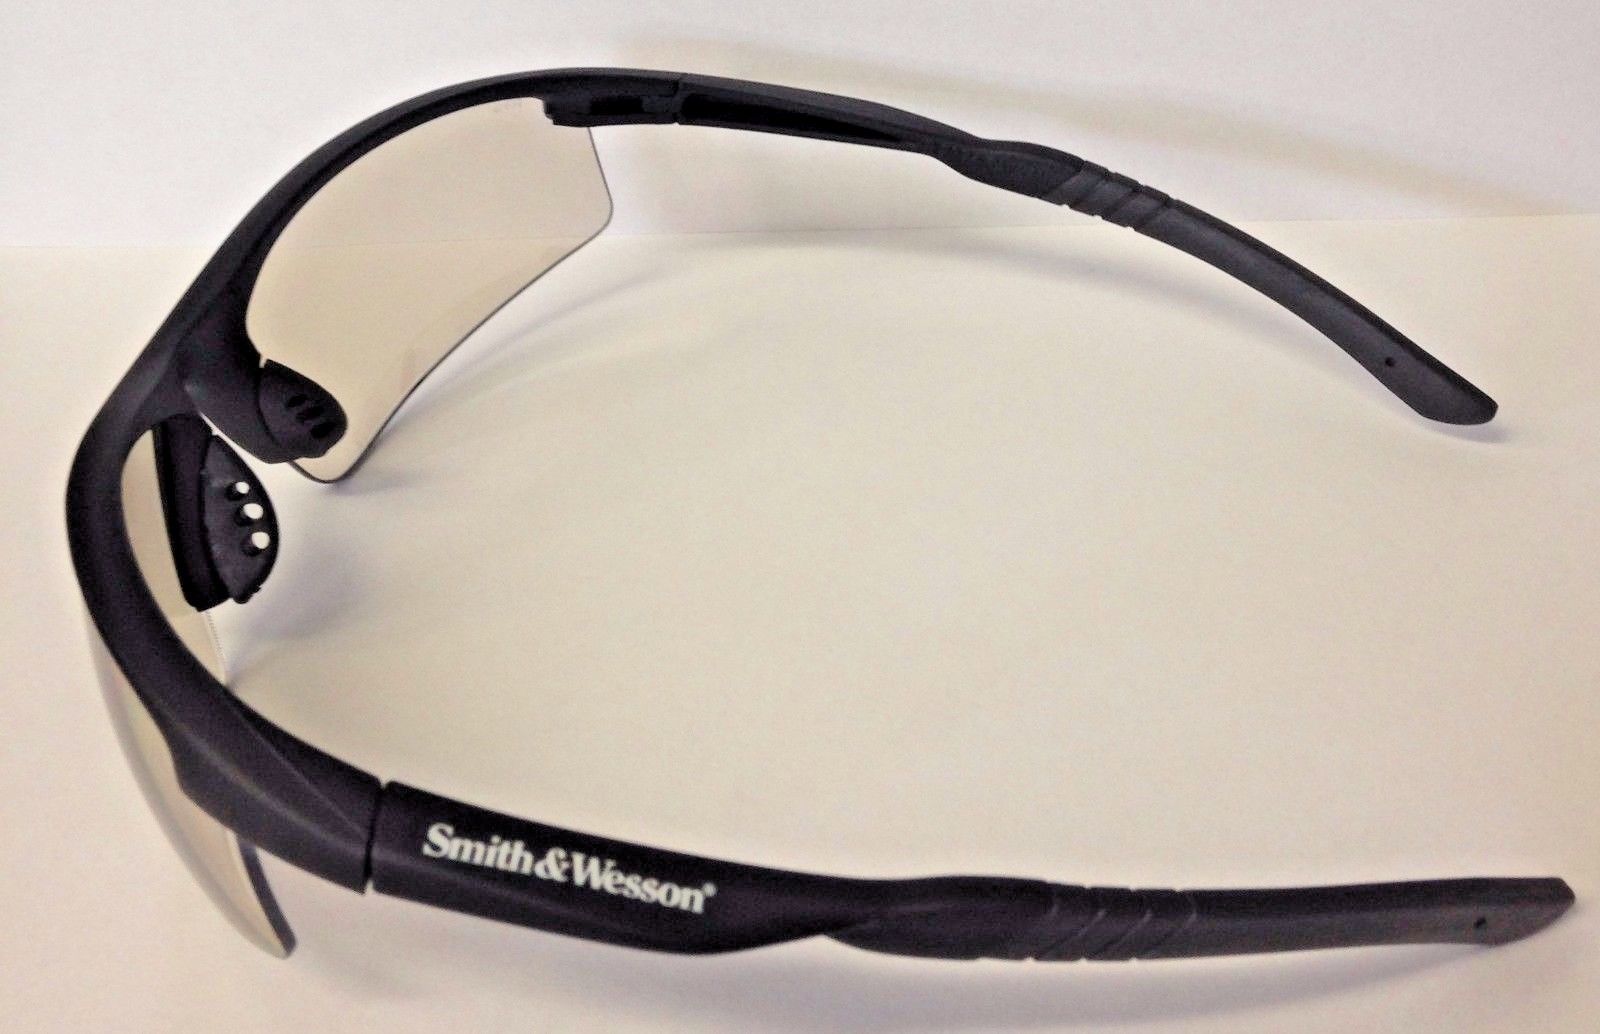 Smith & Wesson SW104-90-ID Eyewear Safety Shooting Glasses